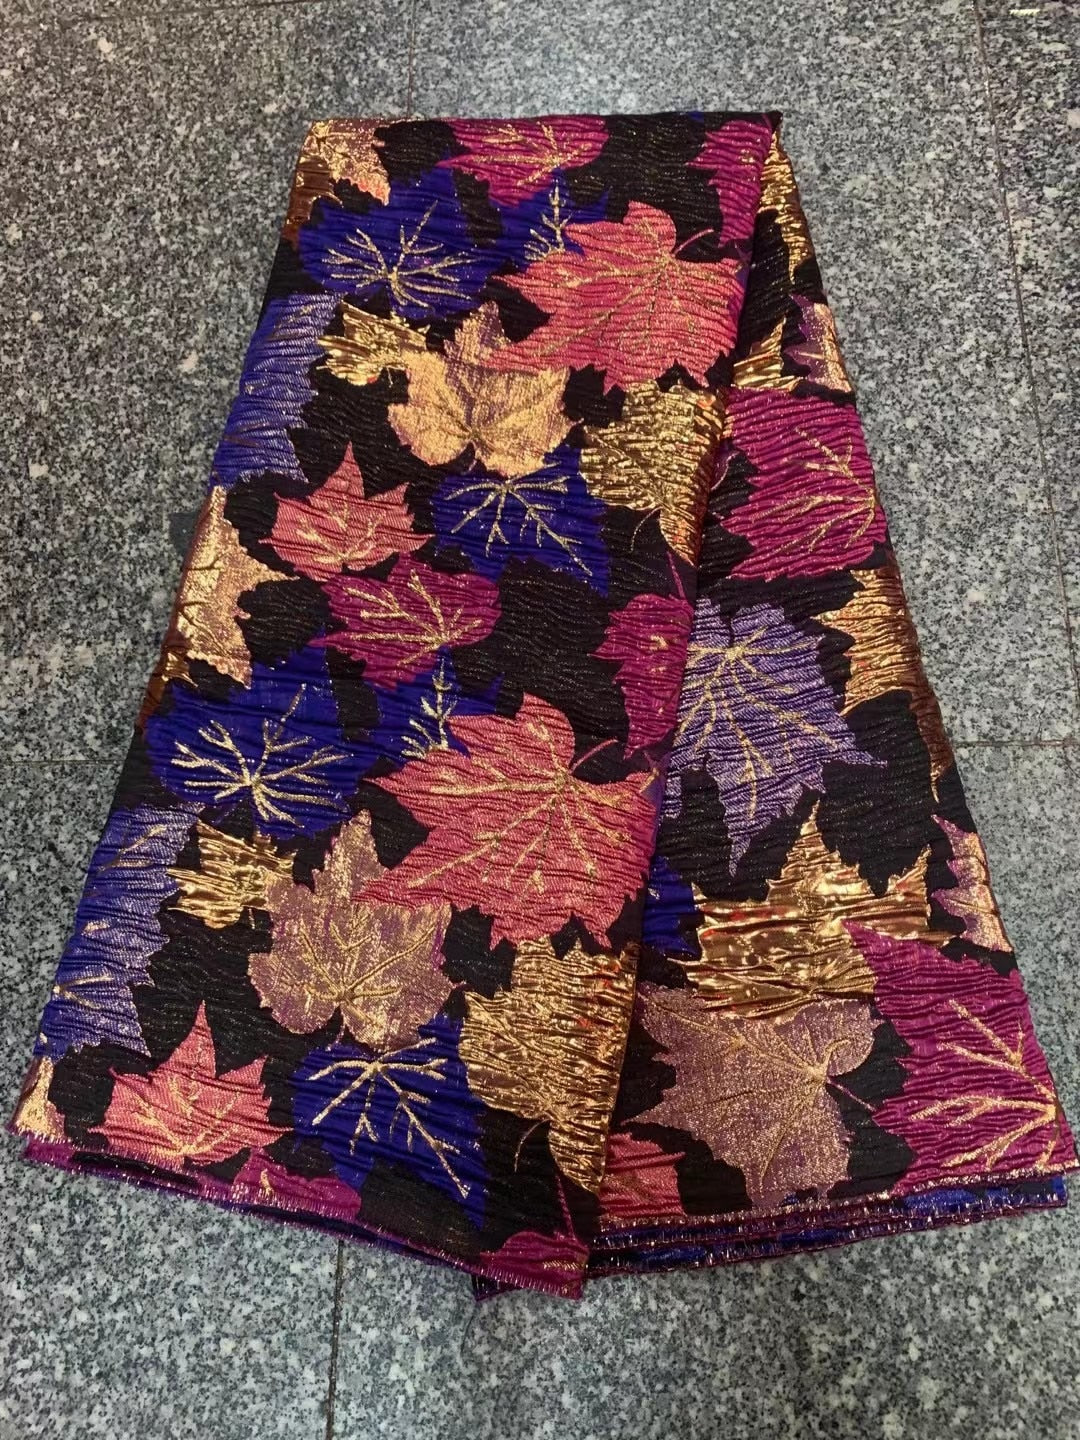 5 YARDS / 8 COLORS / Autumn Leaves Floral Viscose Jacquard Brocade Woven Fashion Jacket Dress Fabric